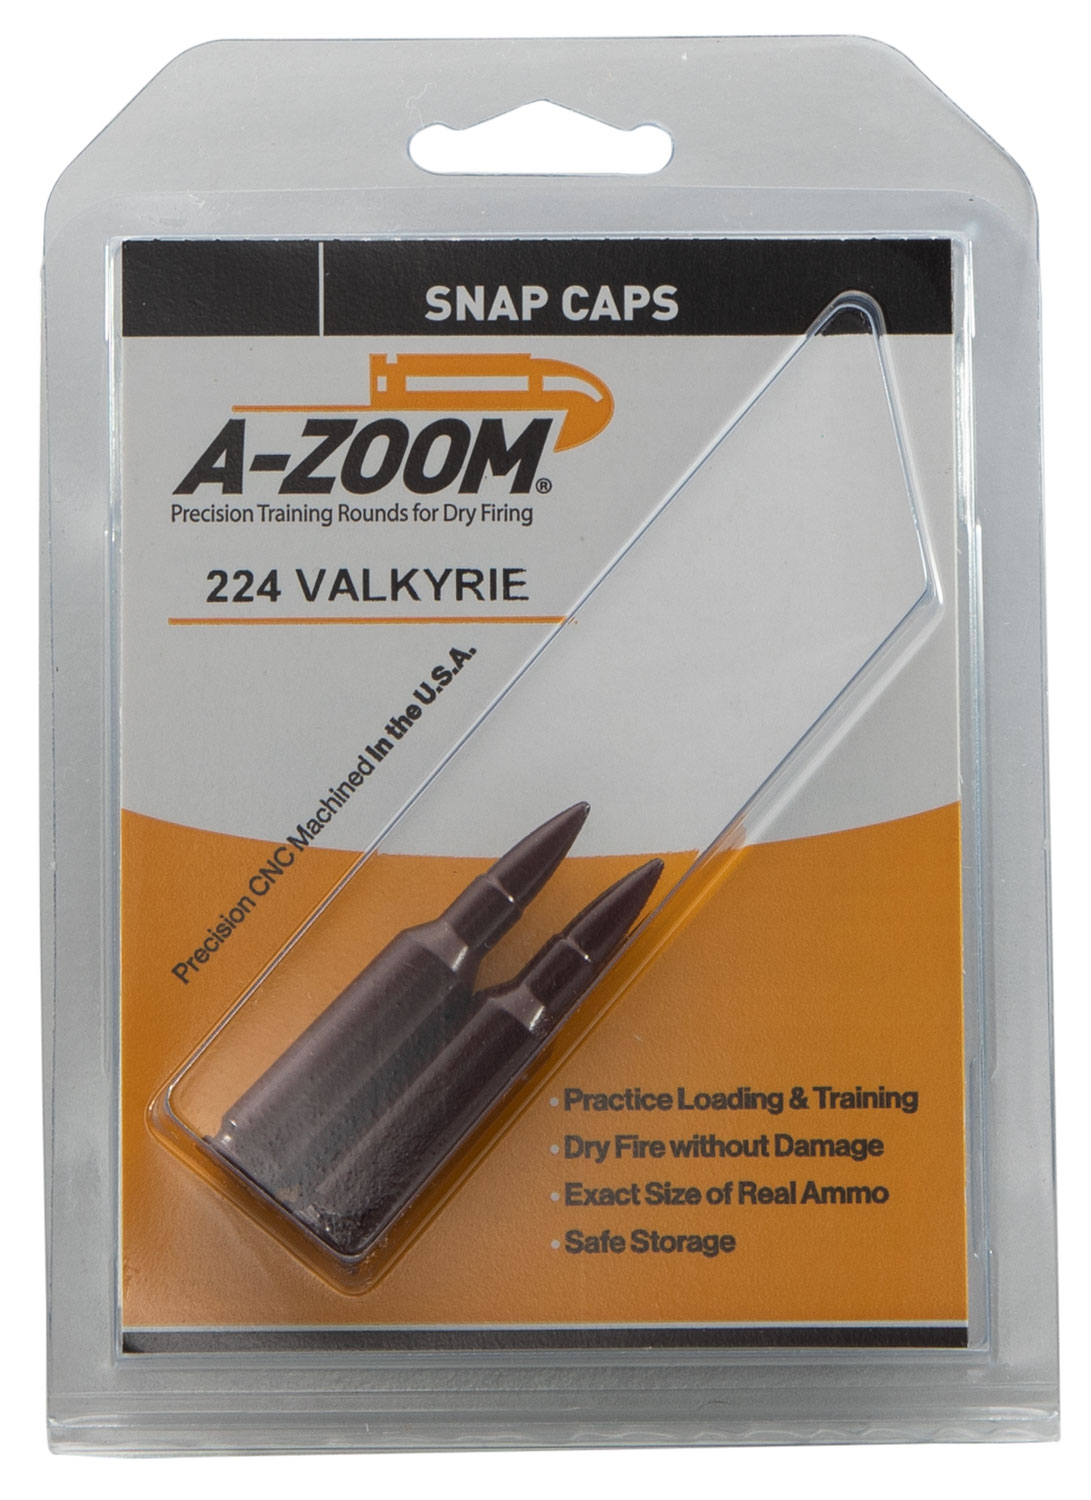 A-ZOOM METAL SNAP CAP .224 VALKYRIE 2-PACK!